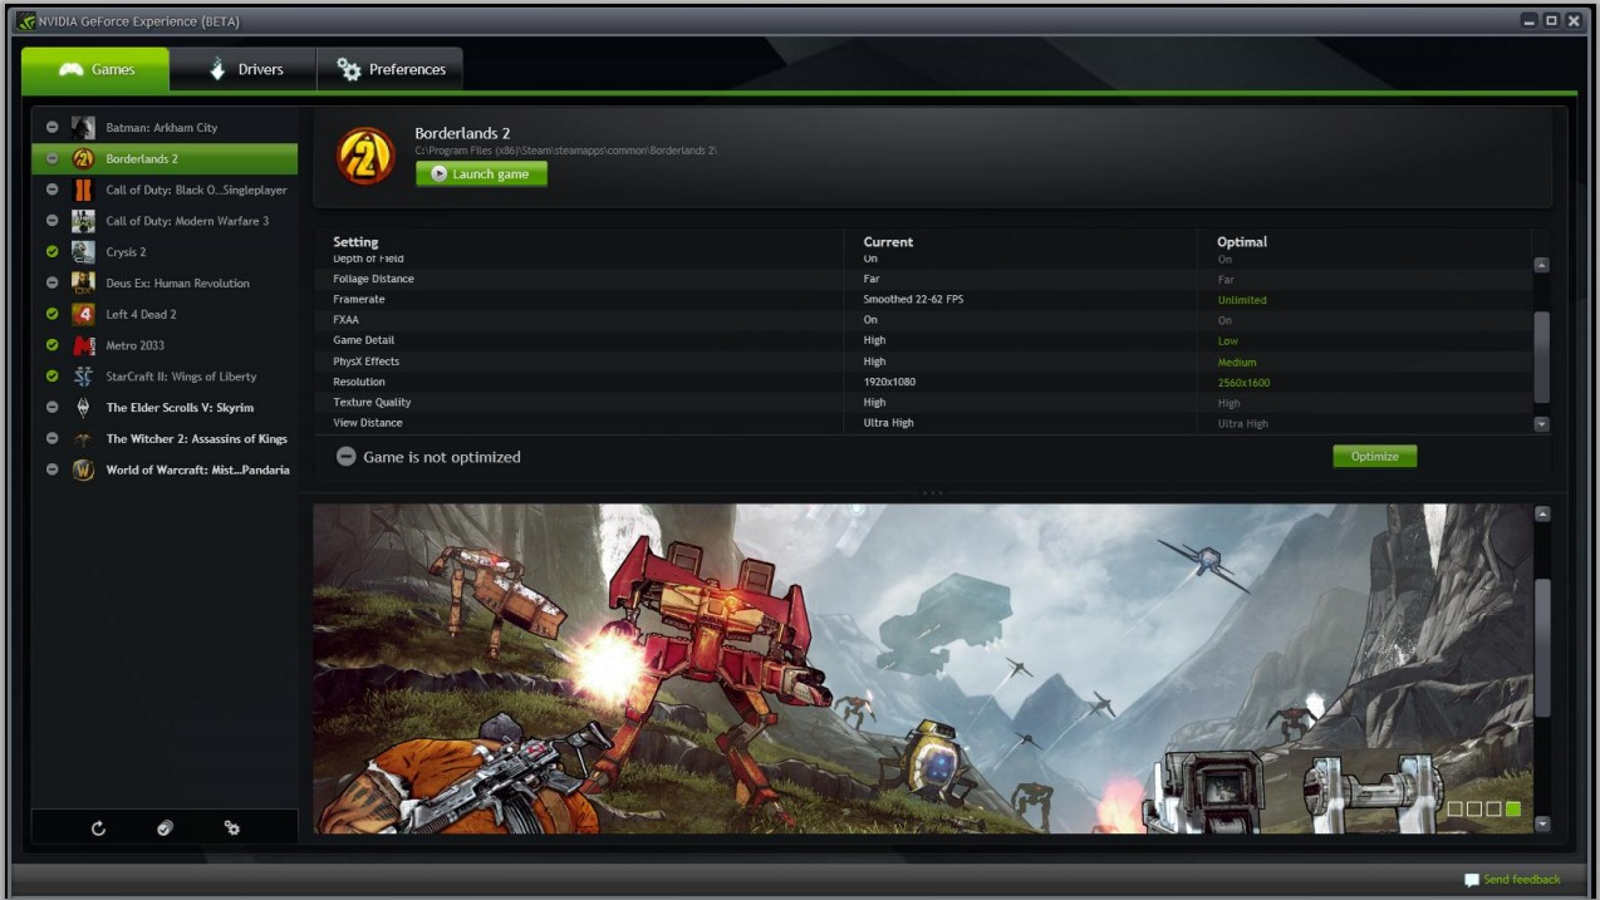 geforce experience game cannot be optimized